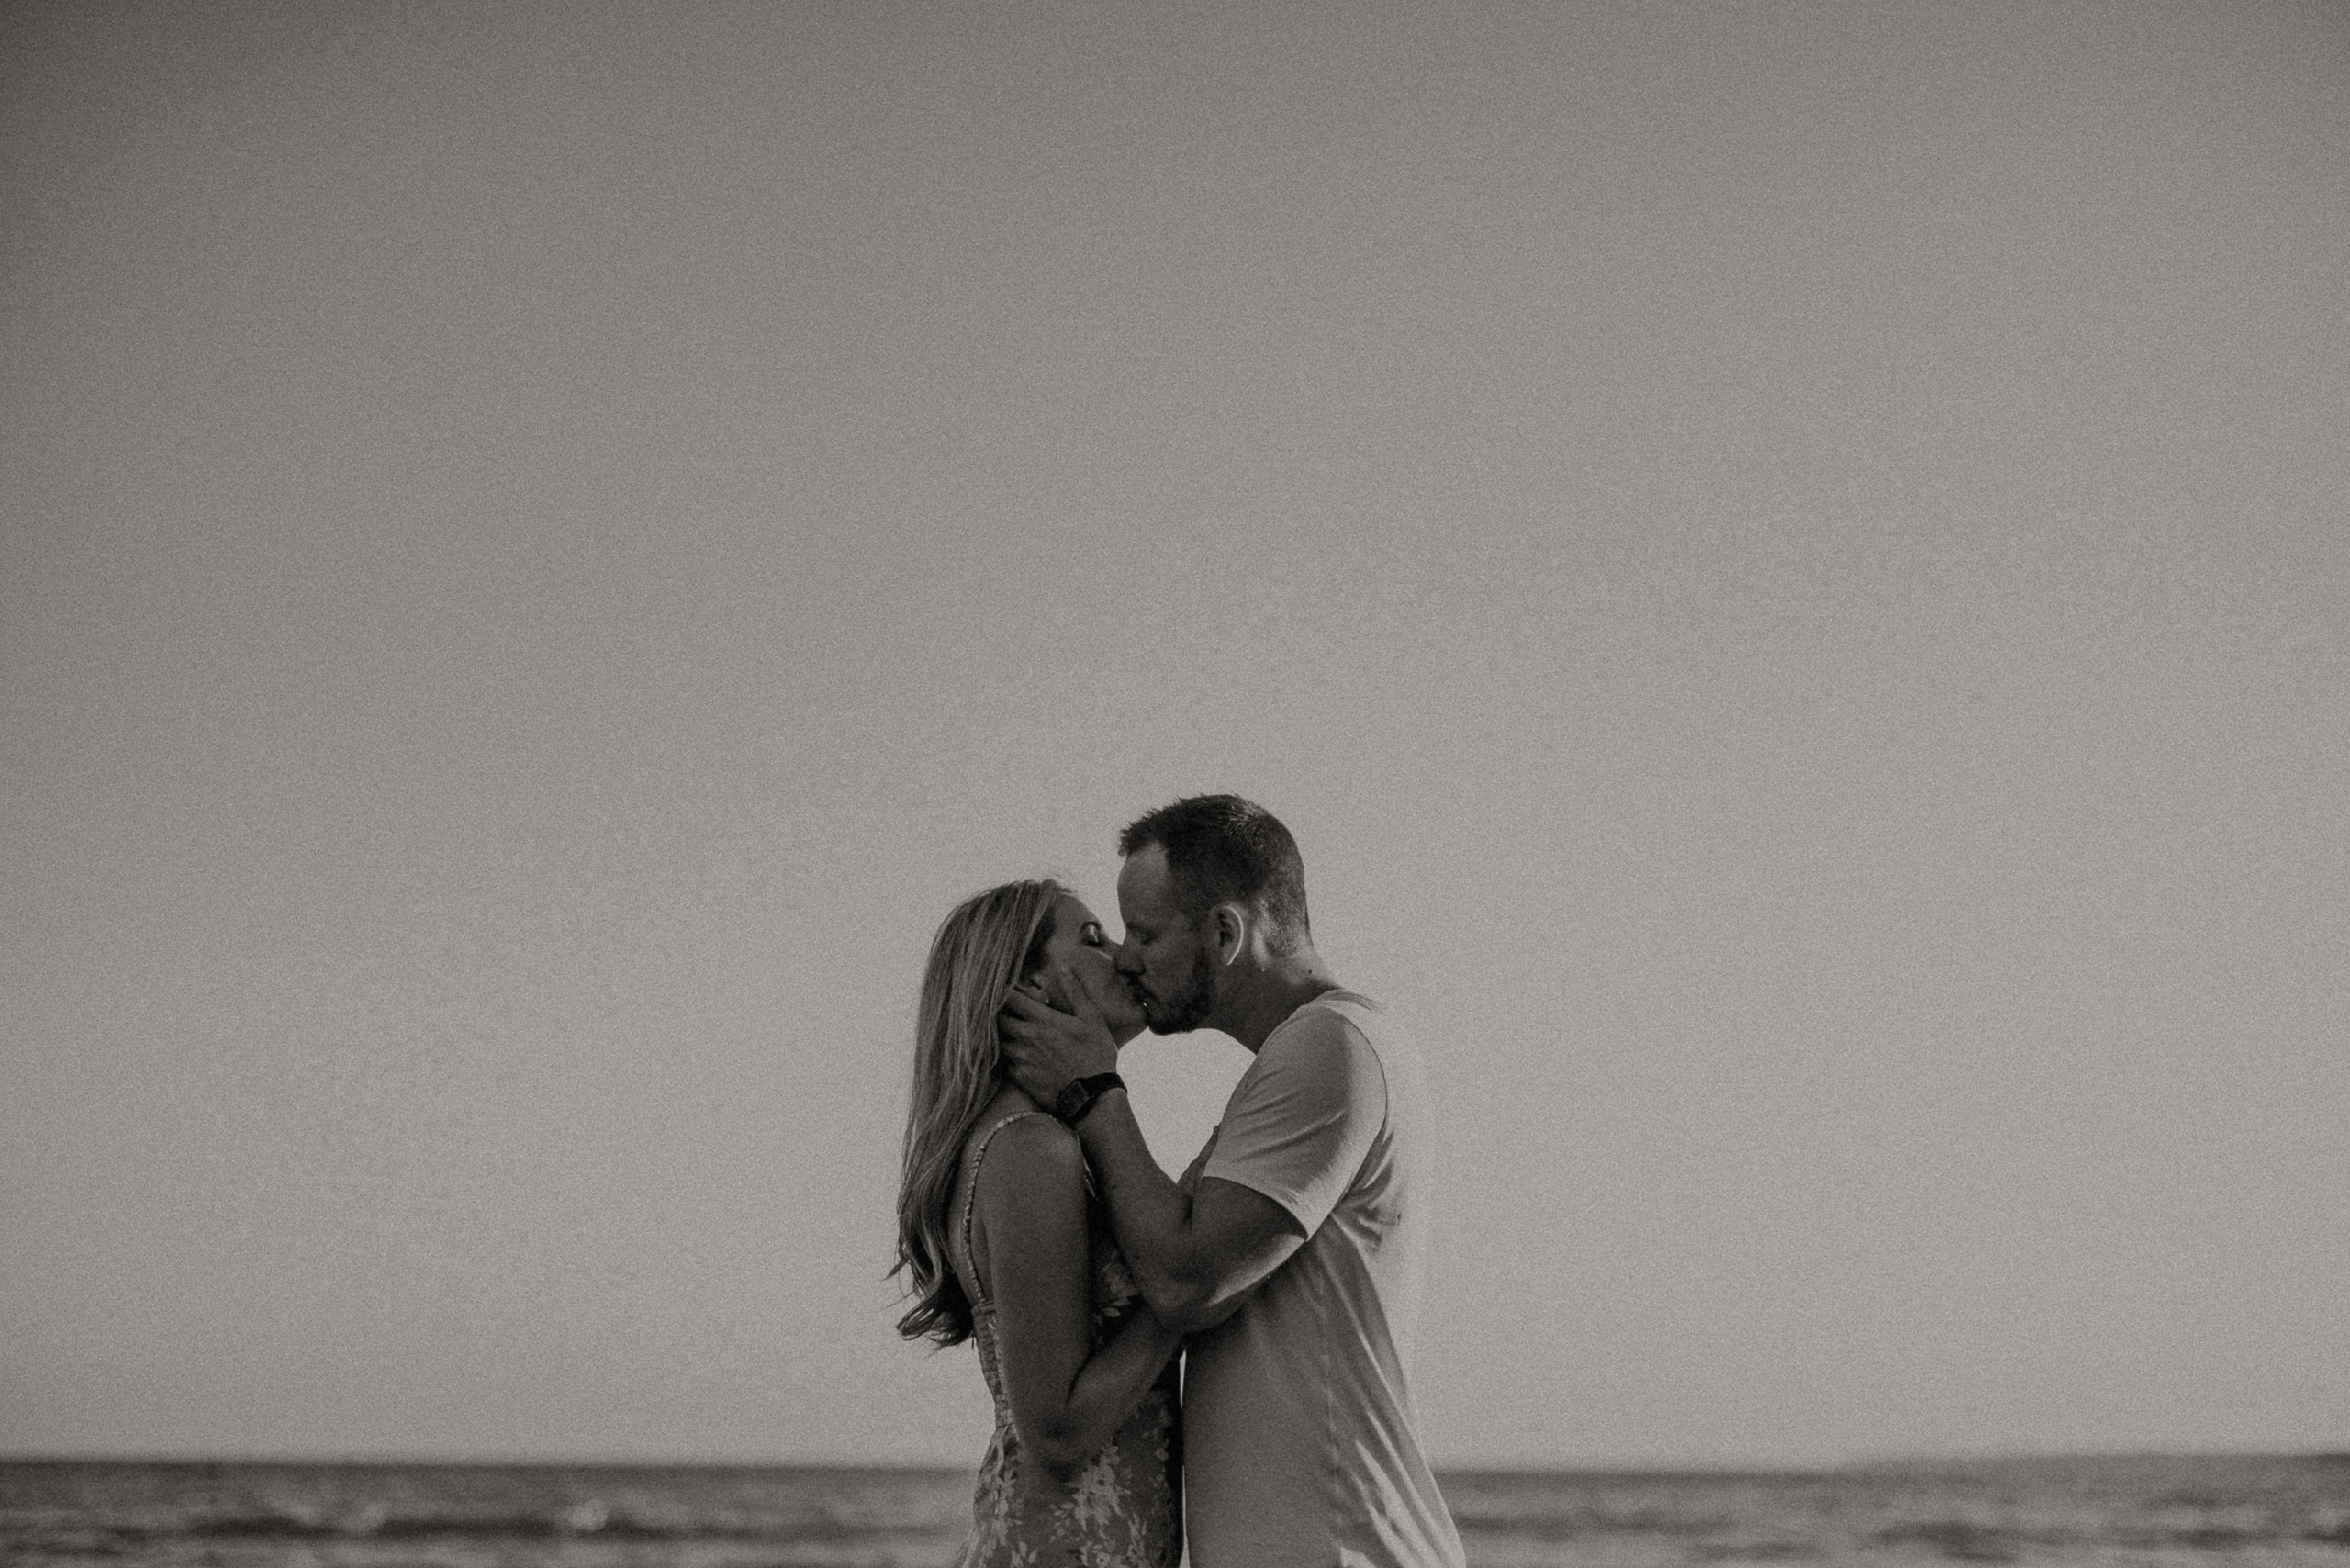 sunset beach romantic engagement session niagara photographer afterglow images